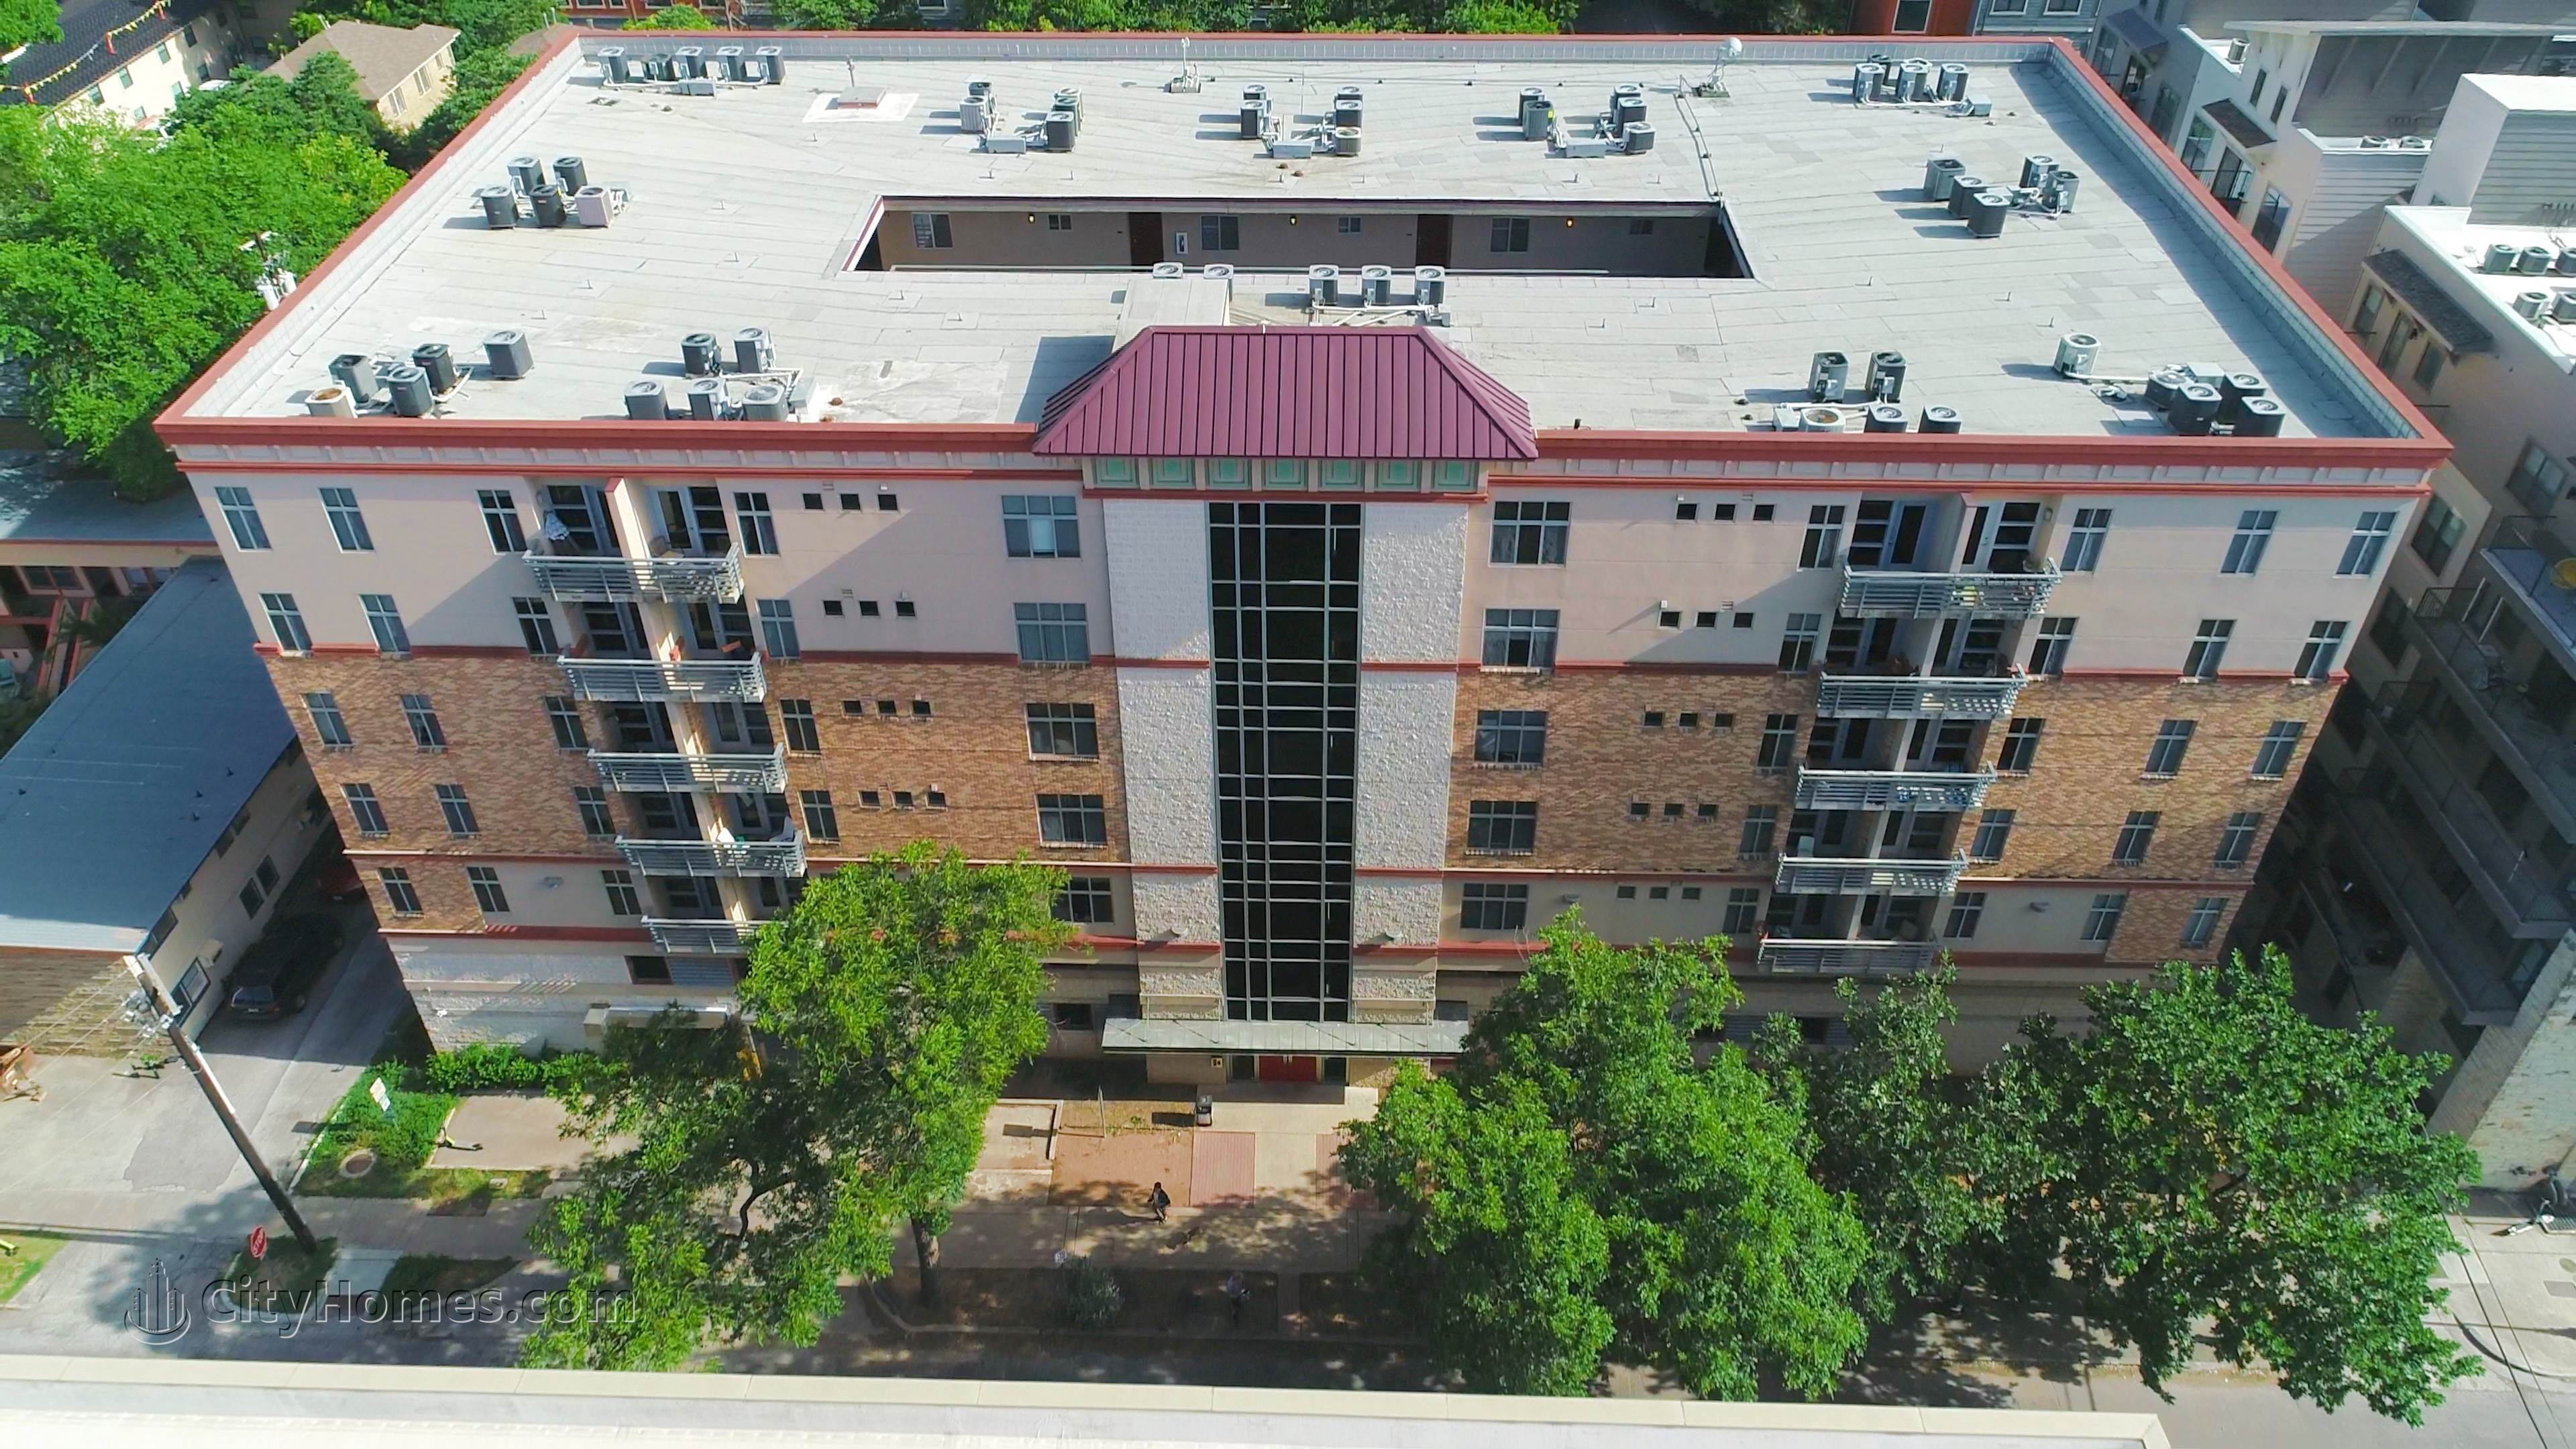 Piazza Navona Condos xây dựng tại 711 W 26th St, West Campus, Austin, TX 78705